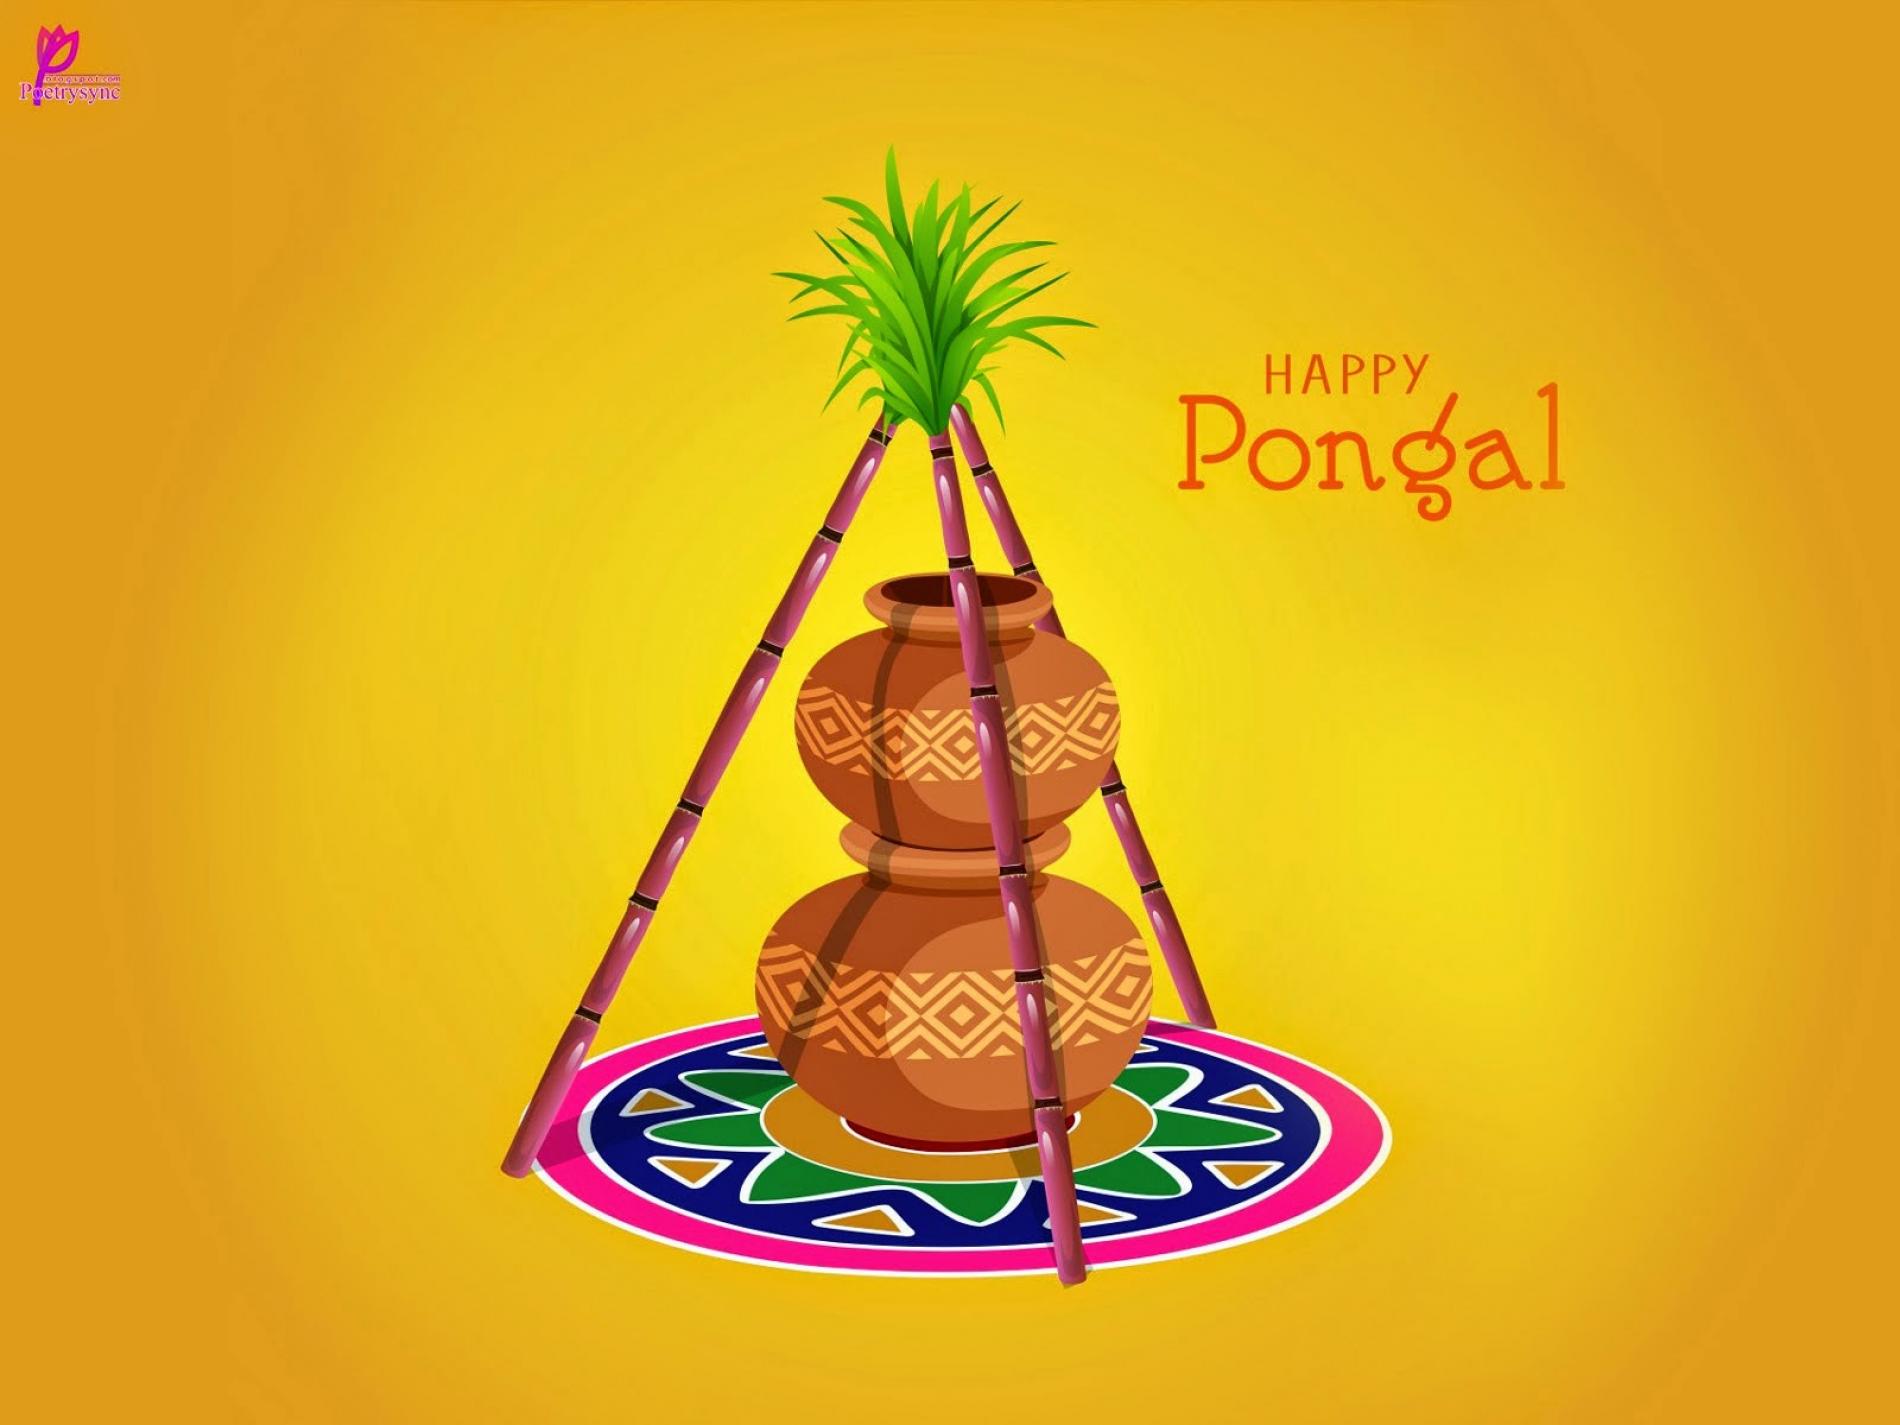 Happy Thai Pongal From Us To You!